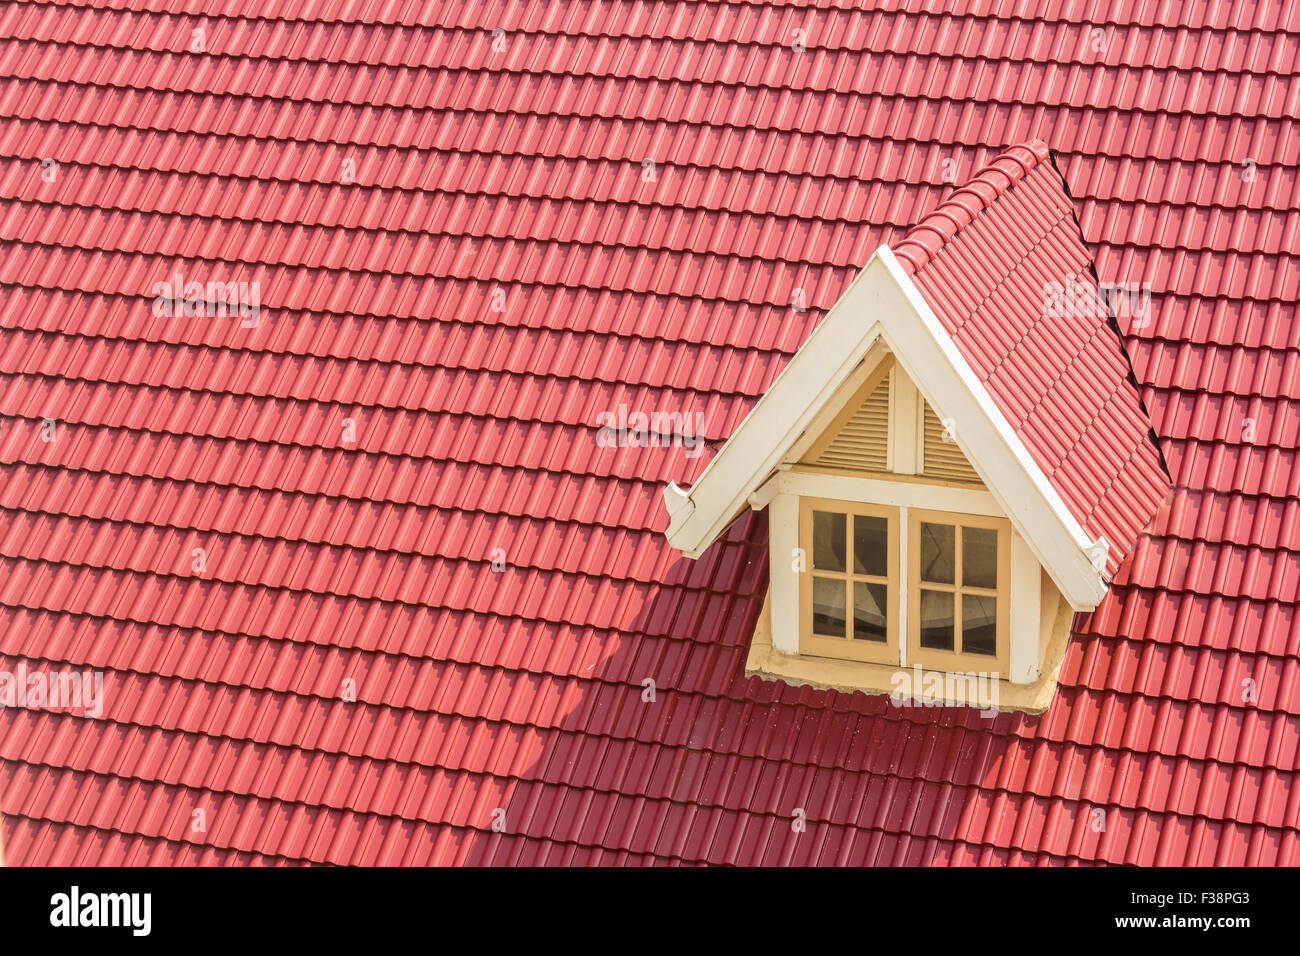 Dormer window on red roof Stock Photo